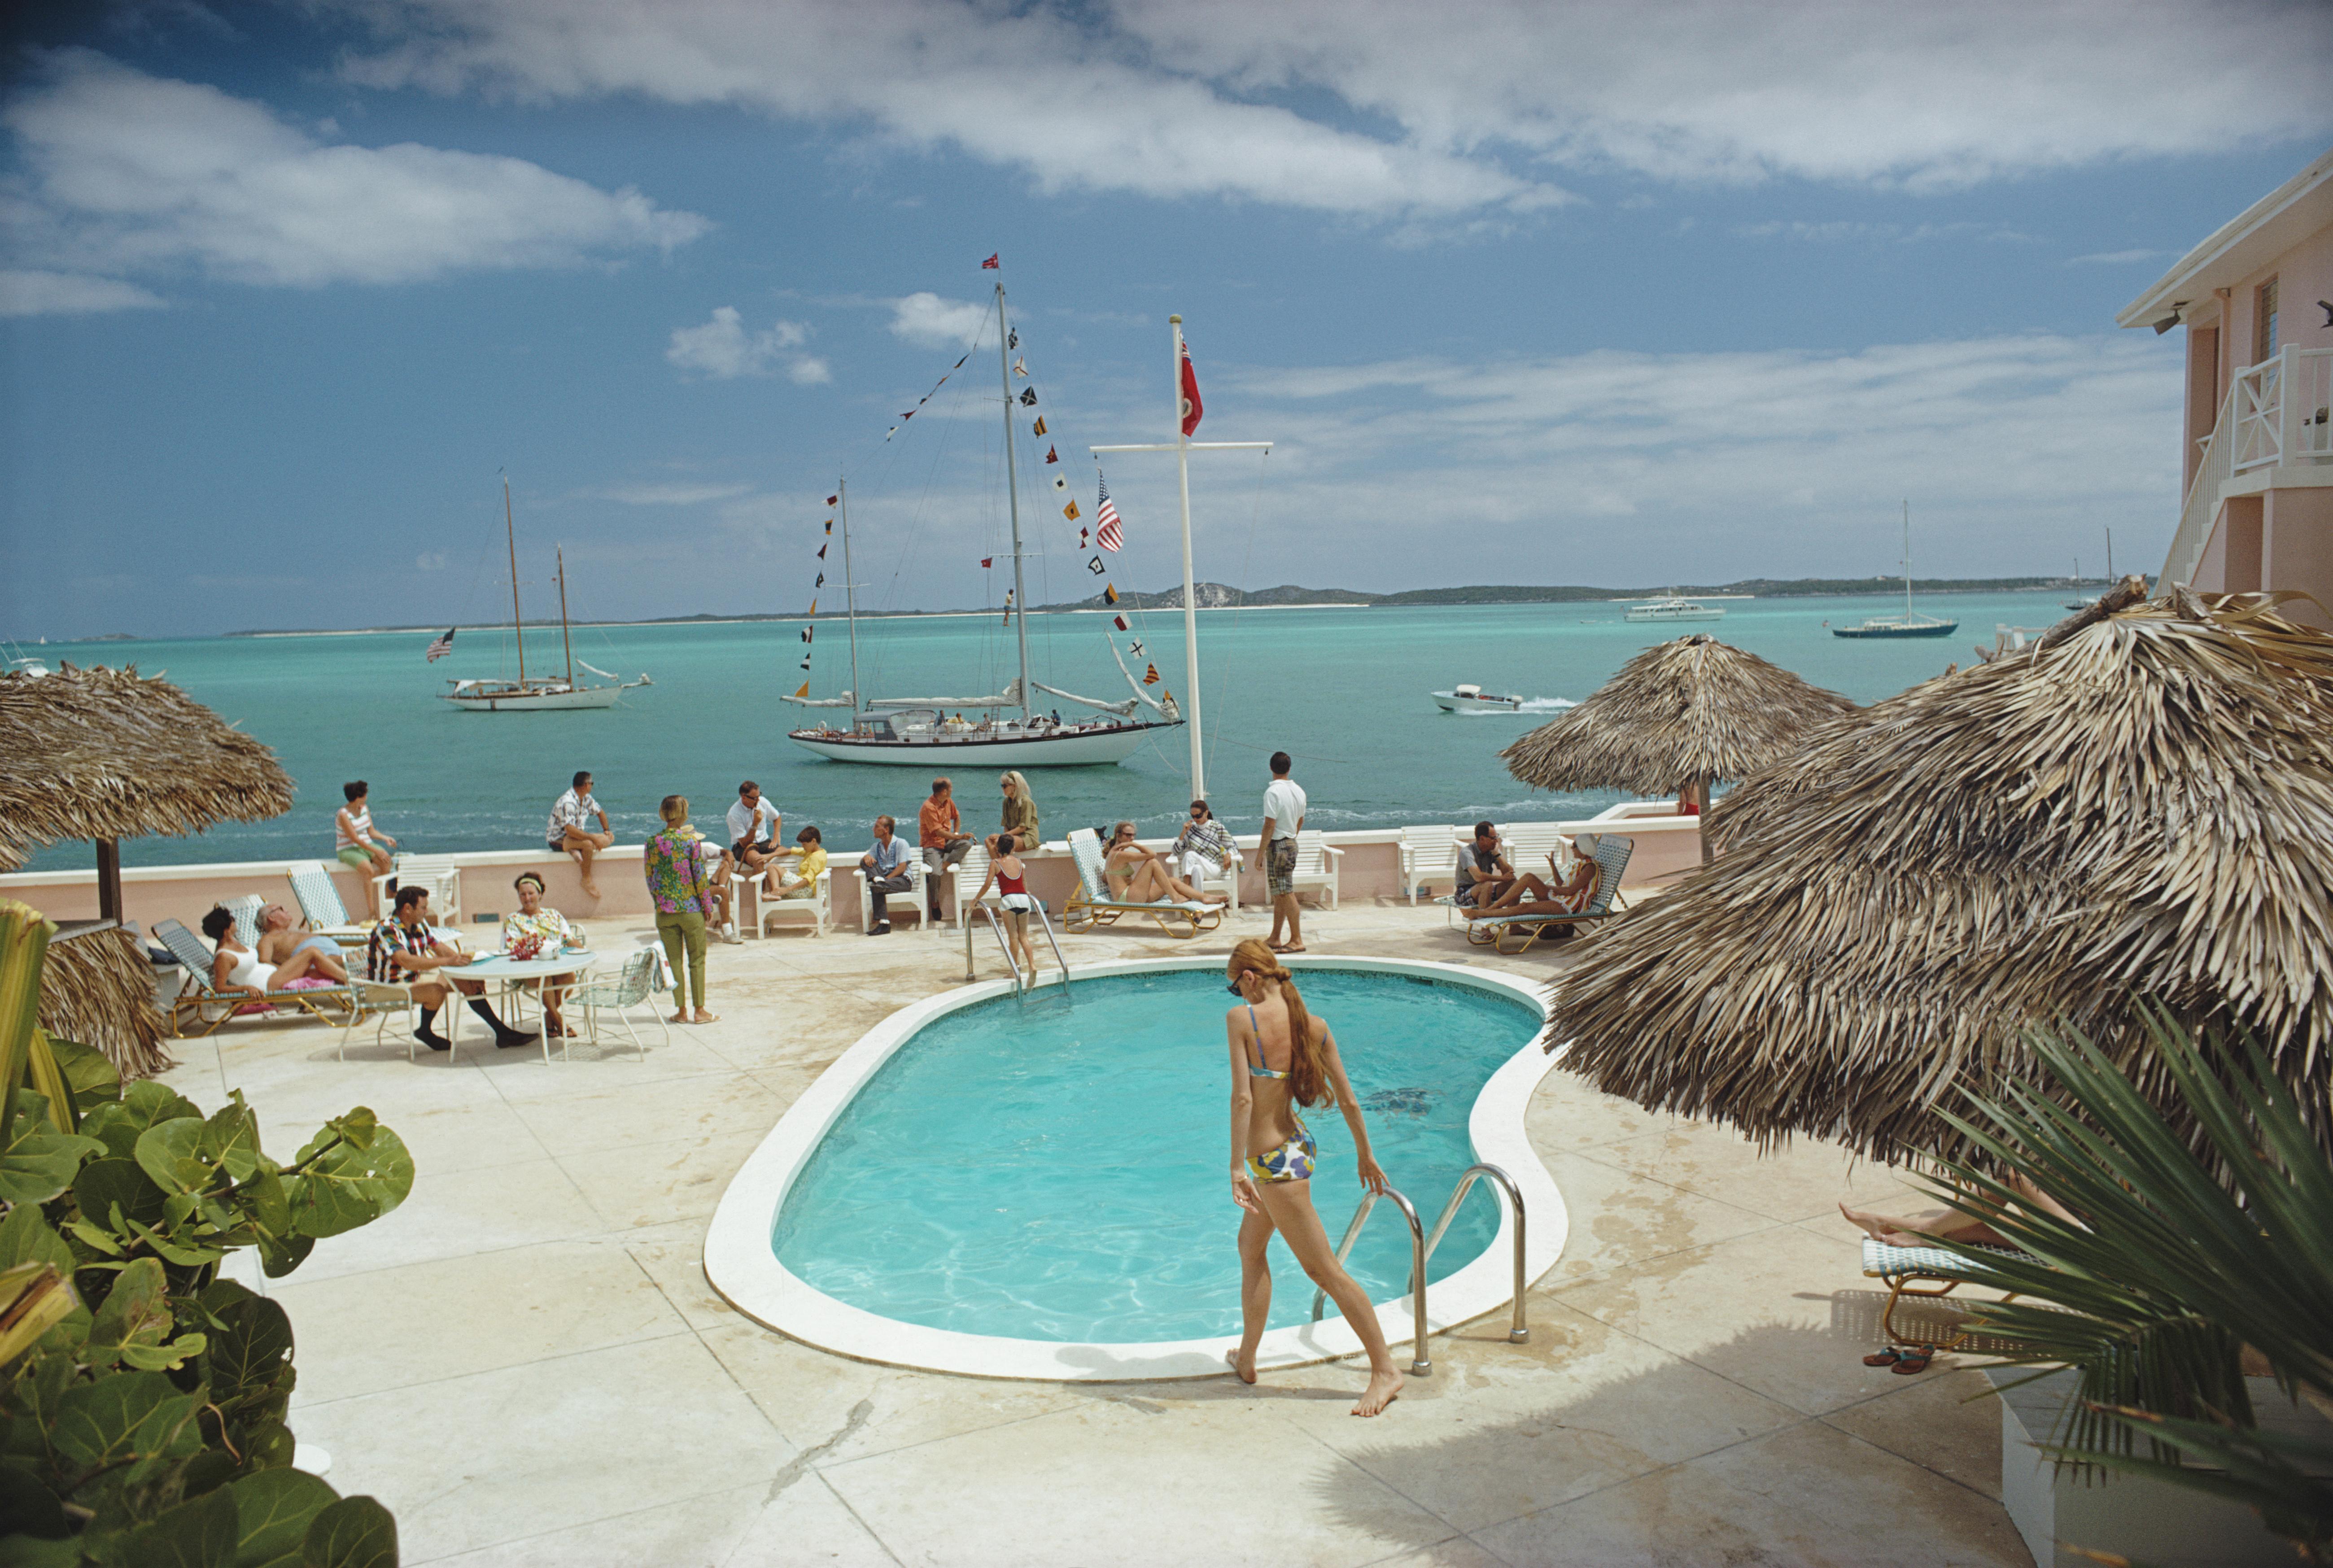 'Peace And Plenty' 1967 Slim Aarons Limited Estate Edition Print 

People by the pool at Club Peace And Plenty, Georgetown on the island of Great Exuma, Bahamas, April 1967. (Photo by Slim Aarons/Hulton Archive/Getty Images)

Produced from the